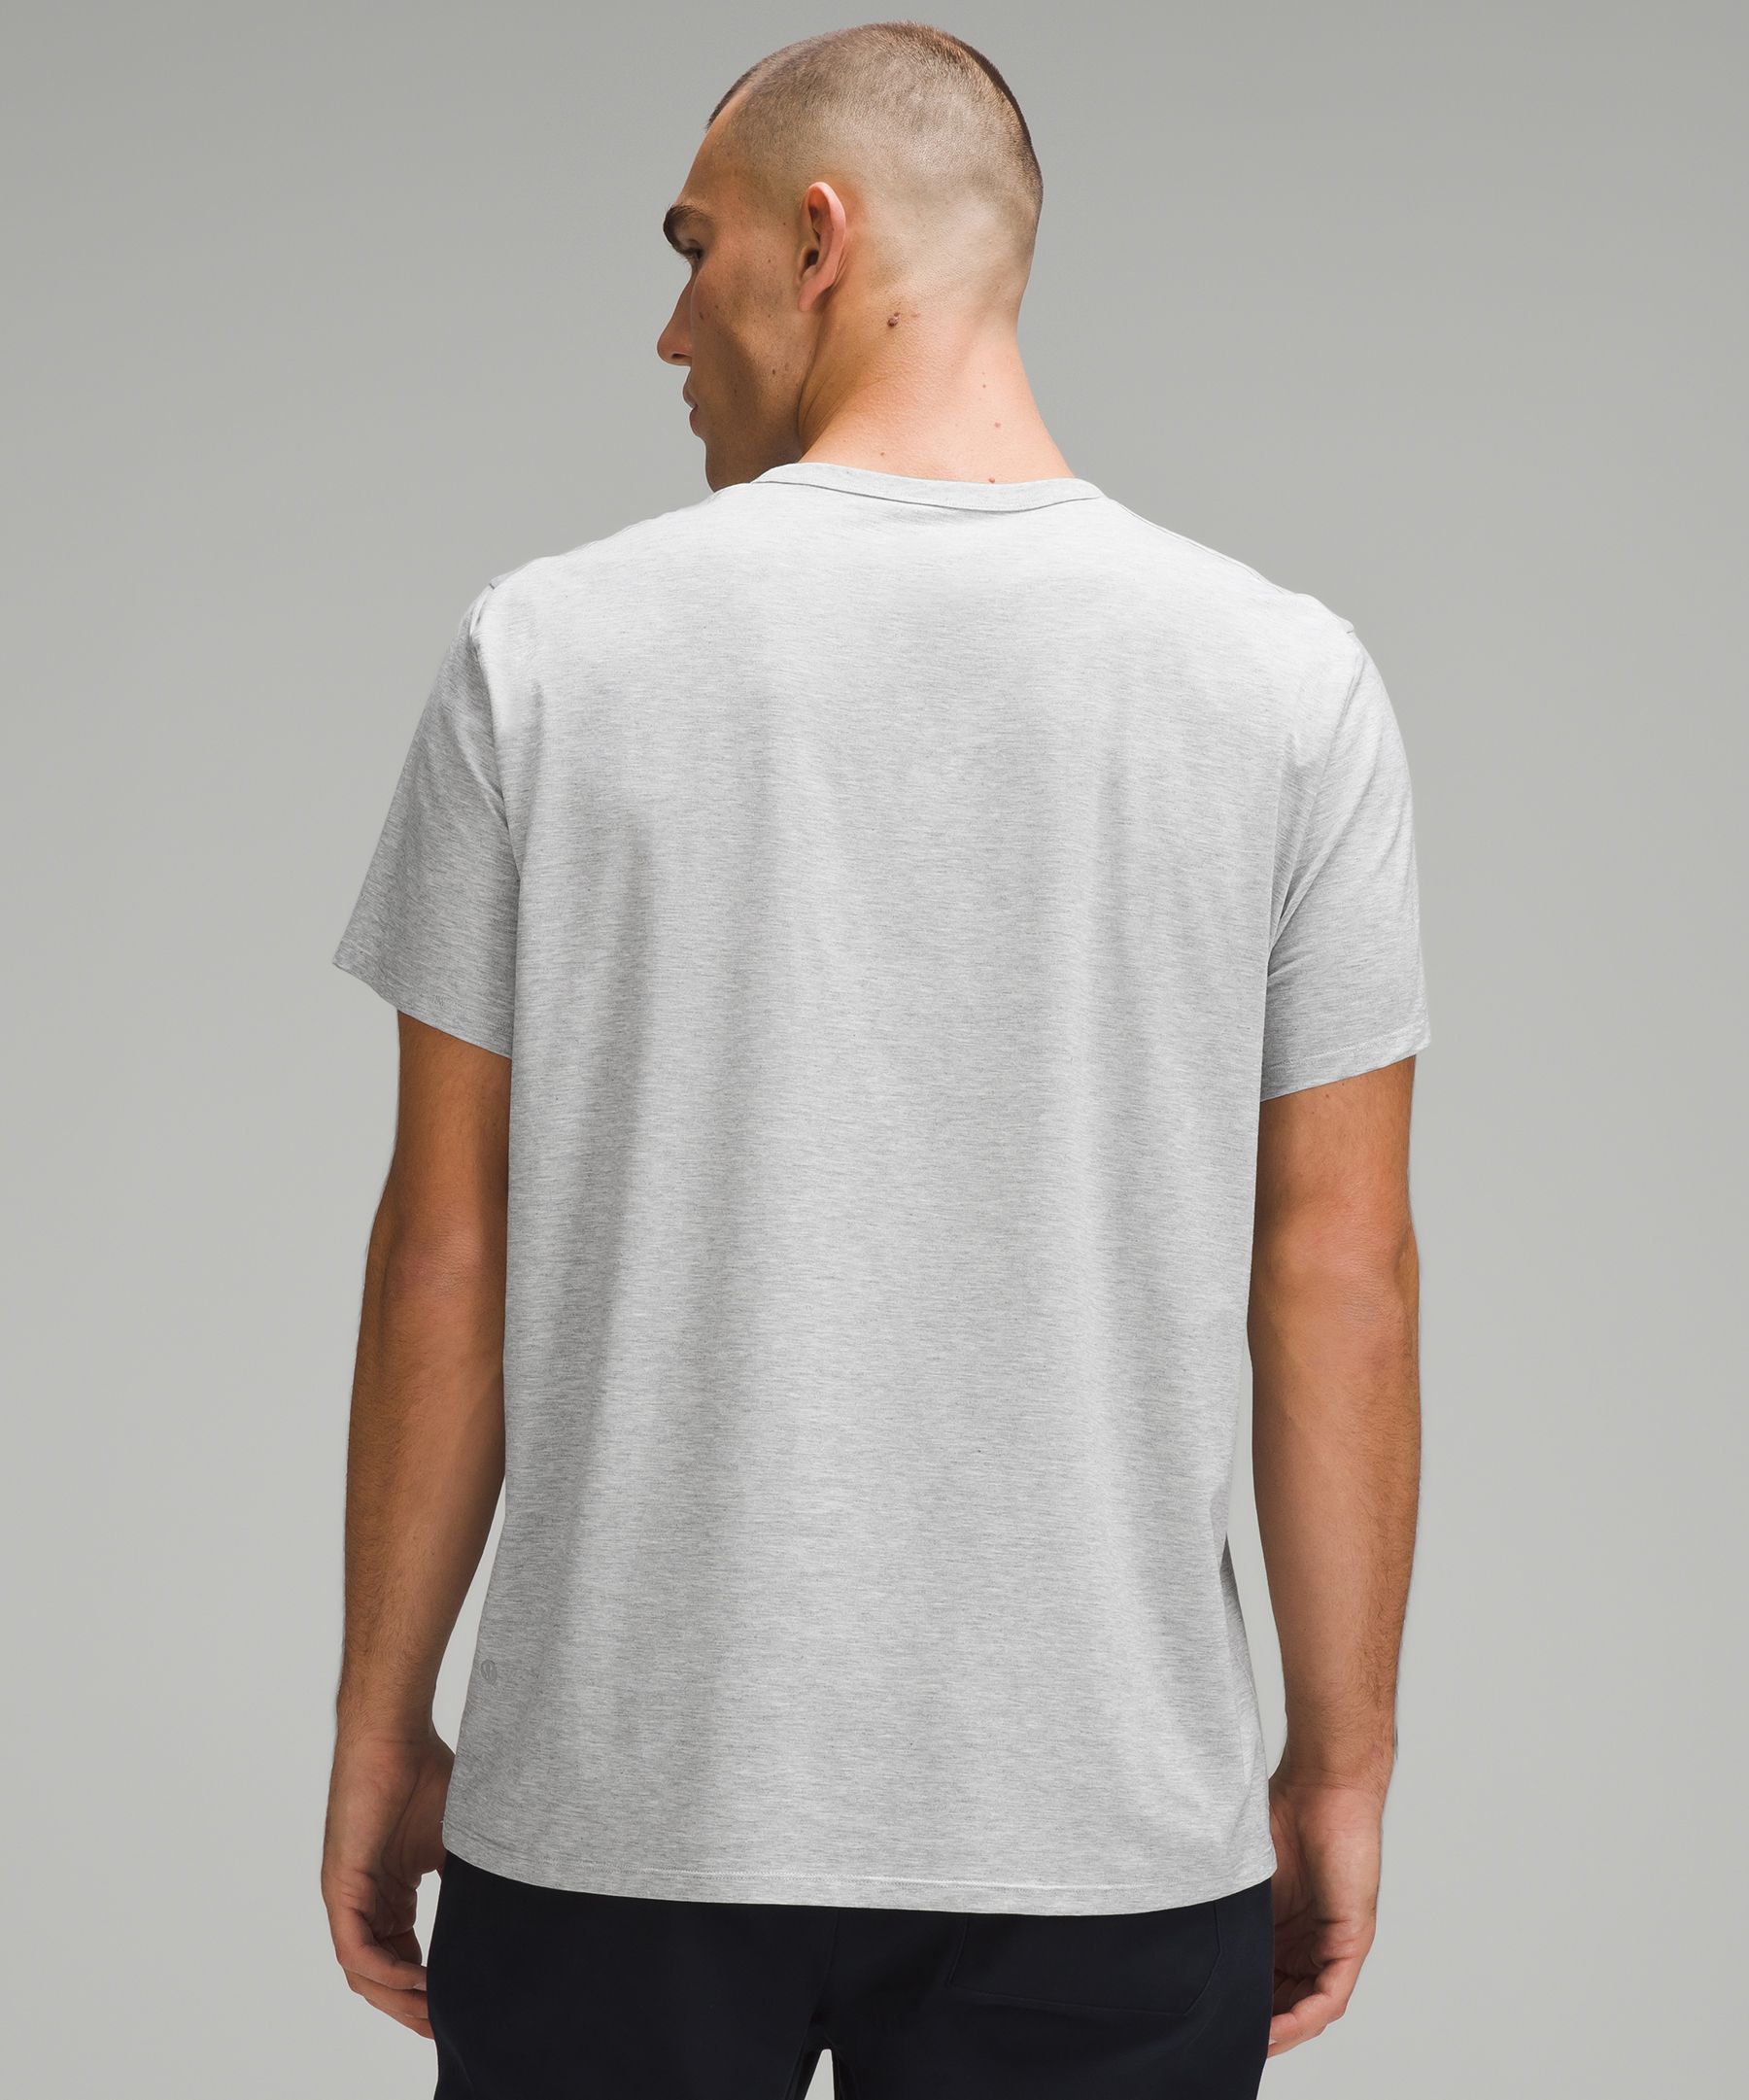 New with Tag* Lululemon Fundamental T-Shirt - Men's L - clothing &  accessories - by owner - apparel sale - craigslist